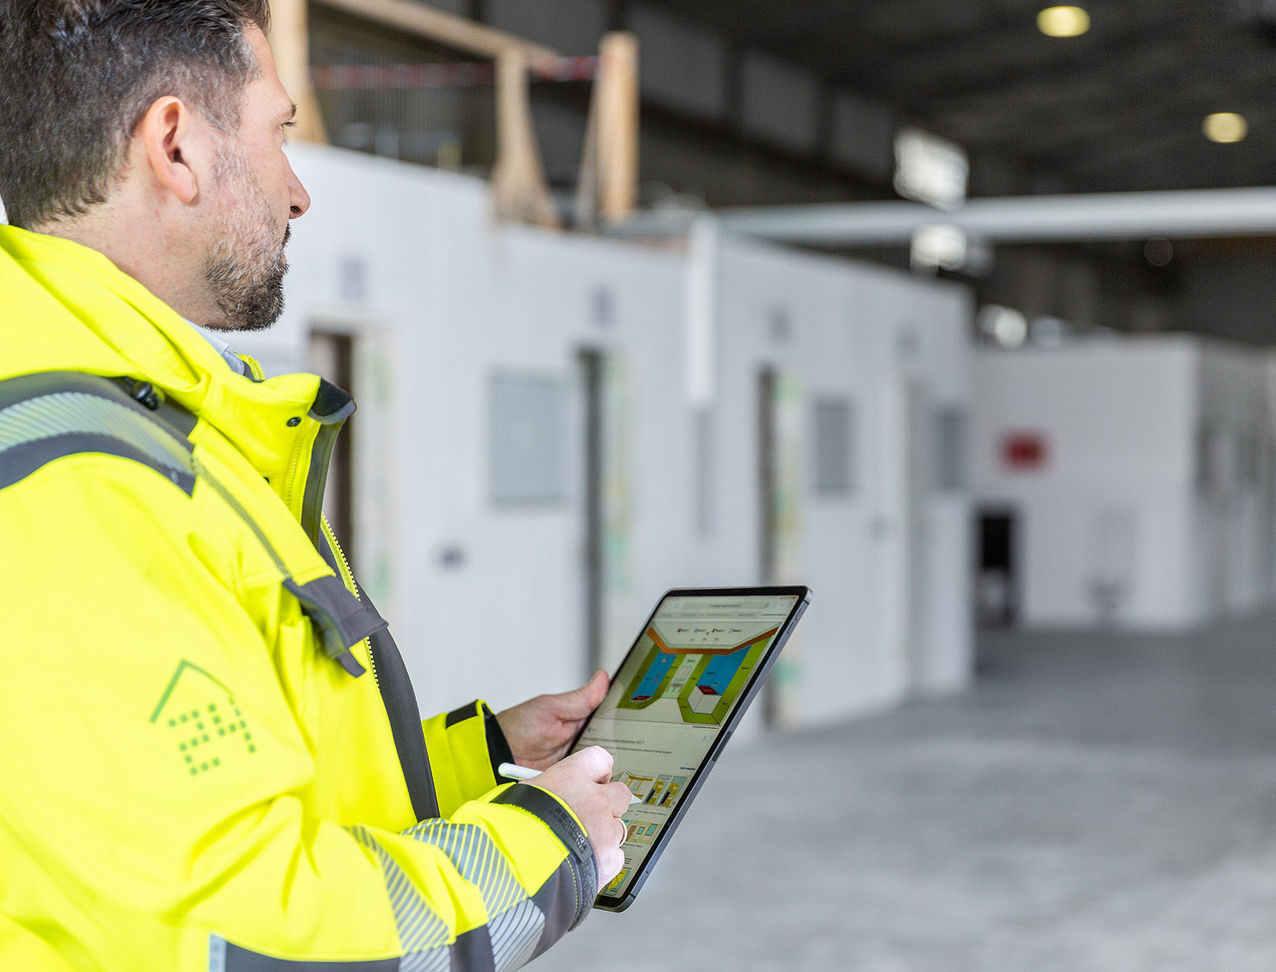 The construction manager monitors the construction progress with a tablet